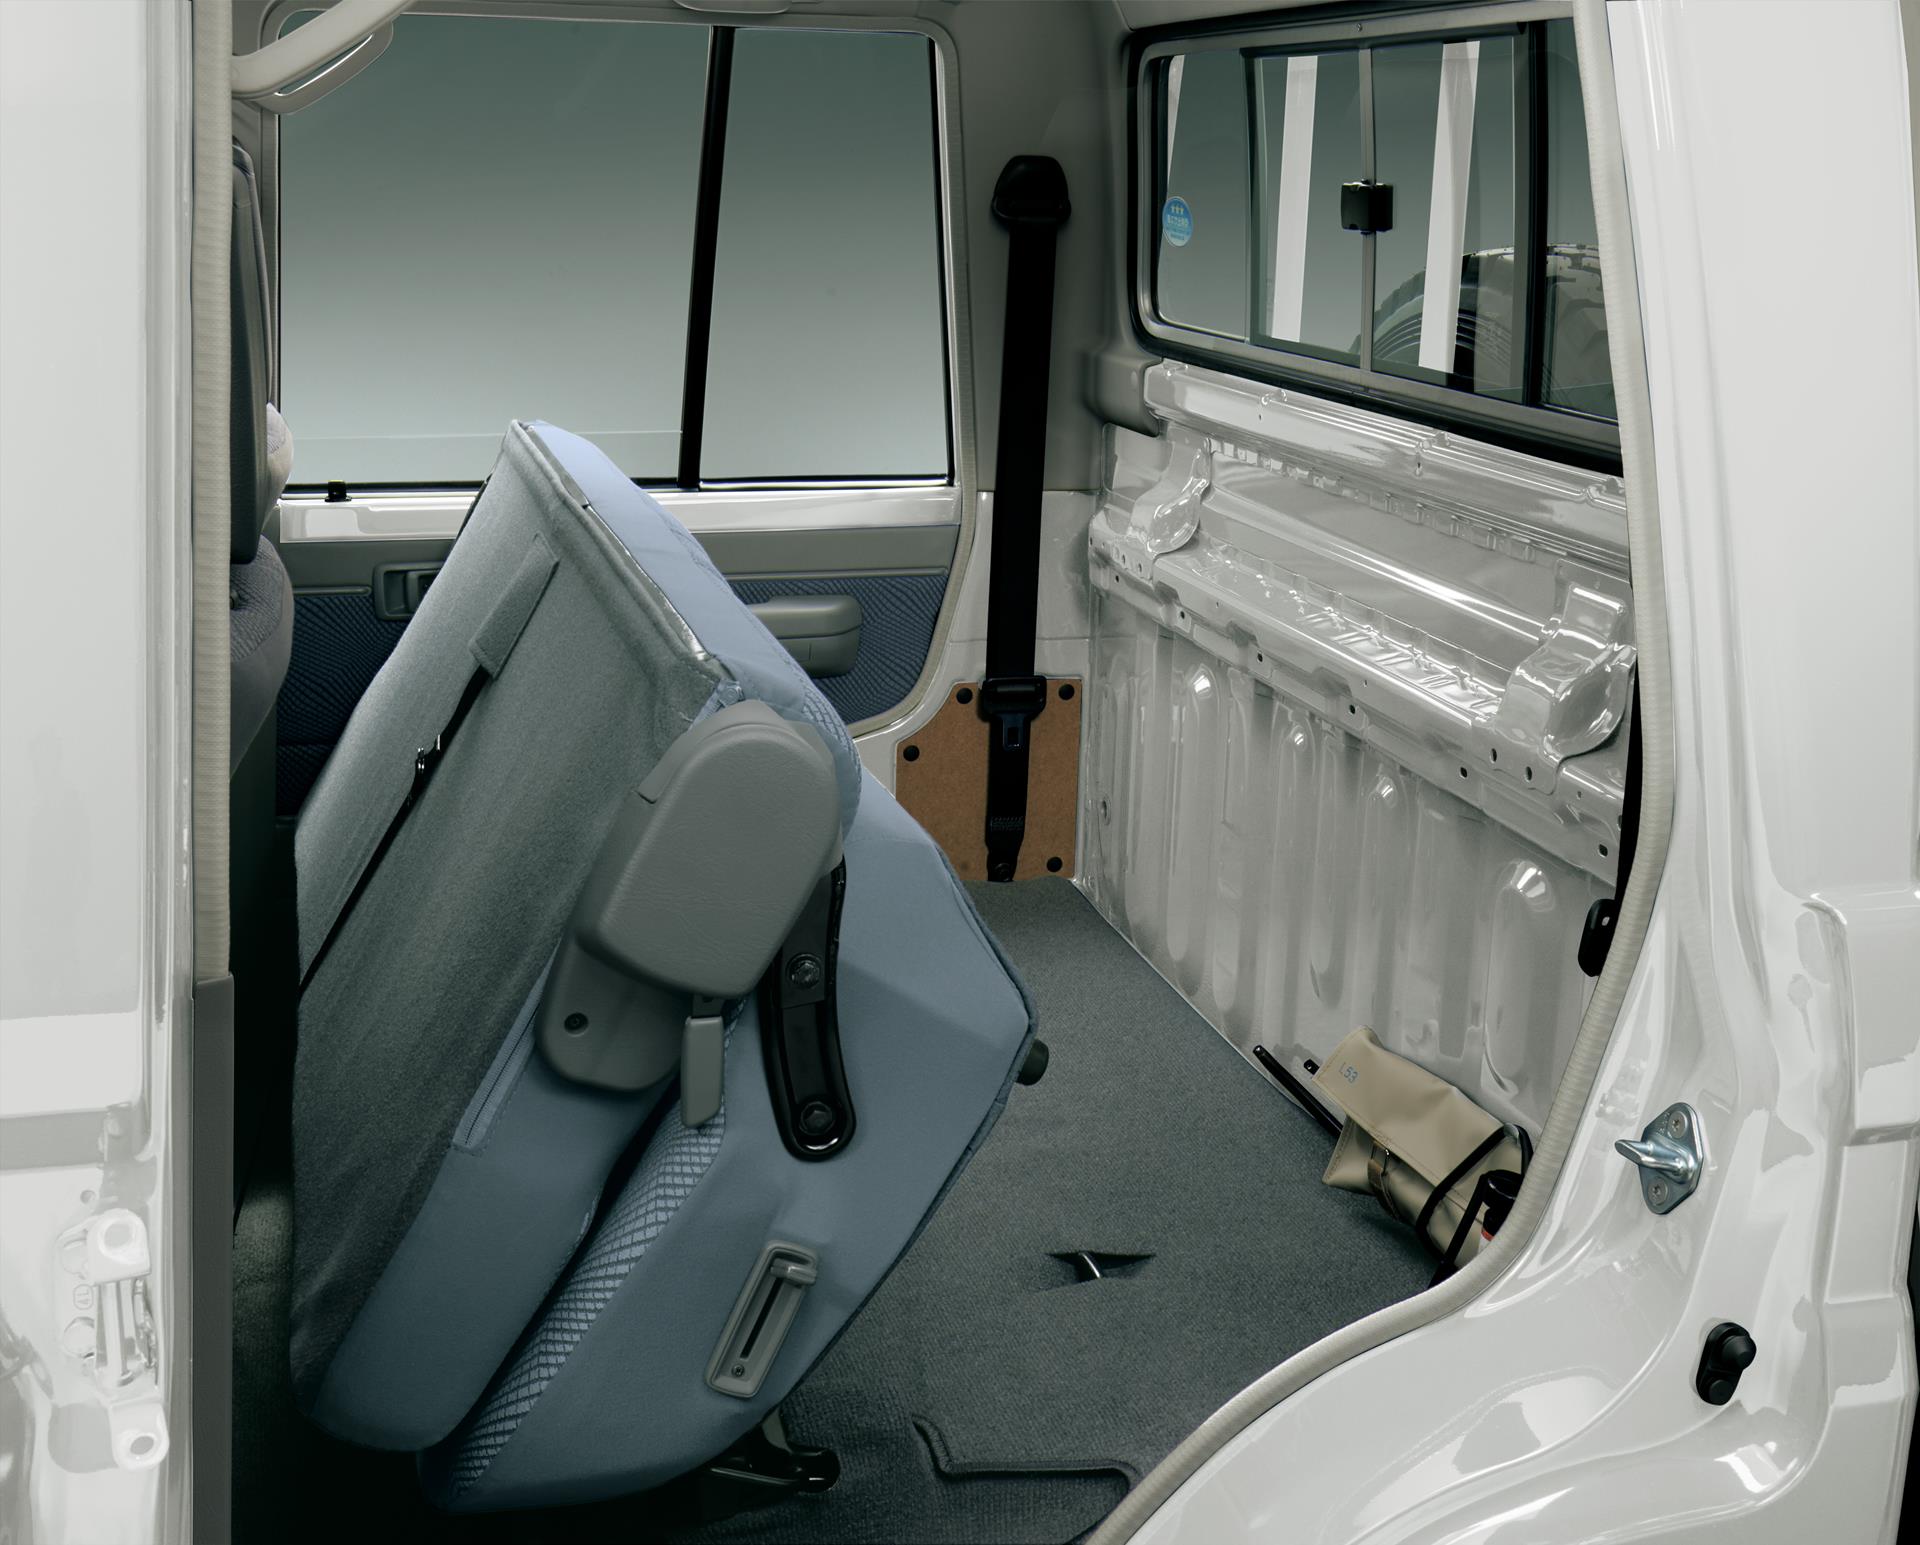 Land Cruiser 70 pickup rear bench seats in stowed position (Japan commemorative re-release)